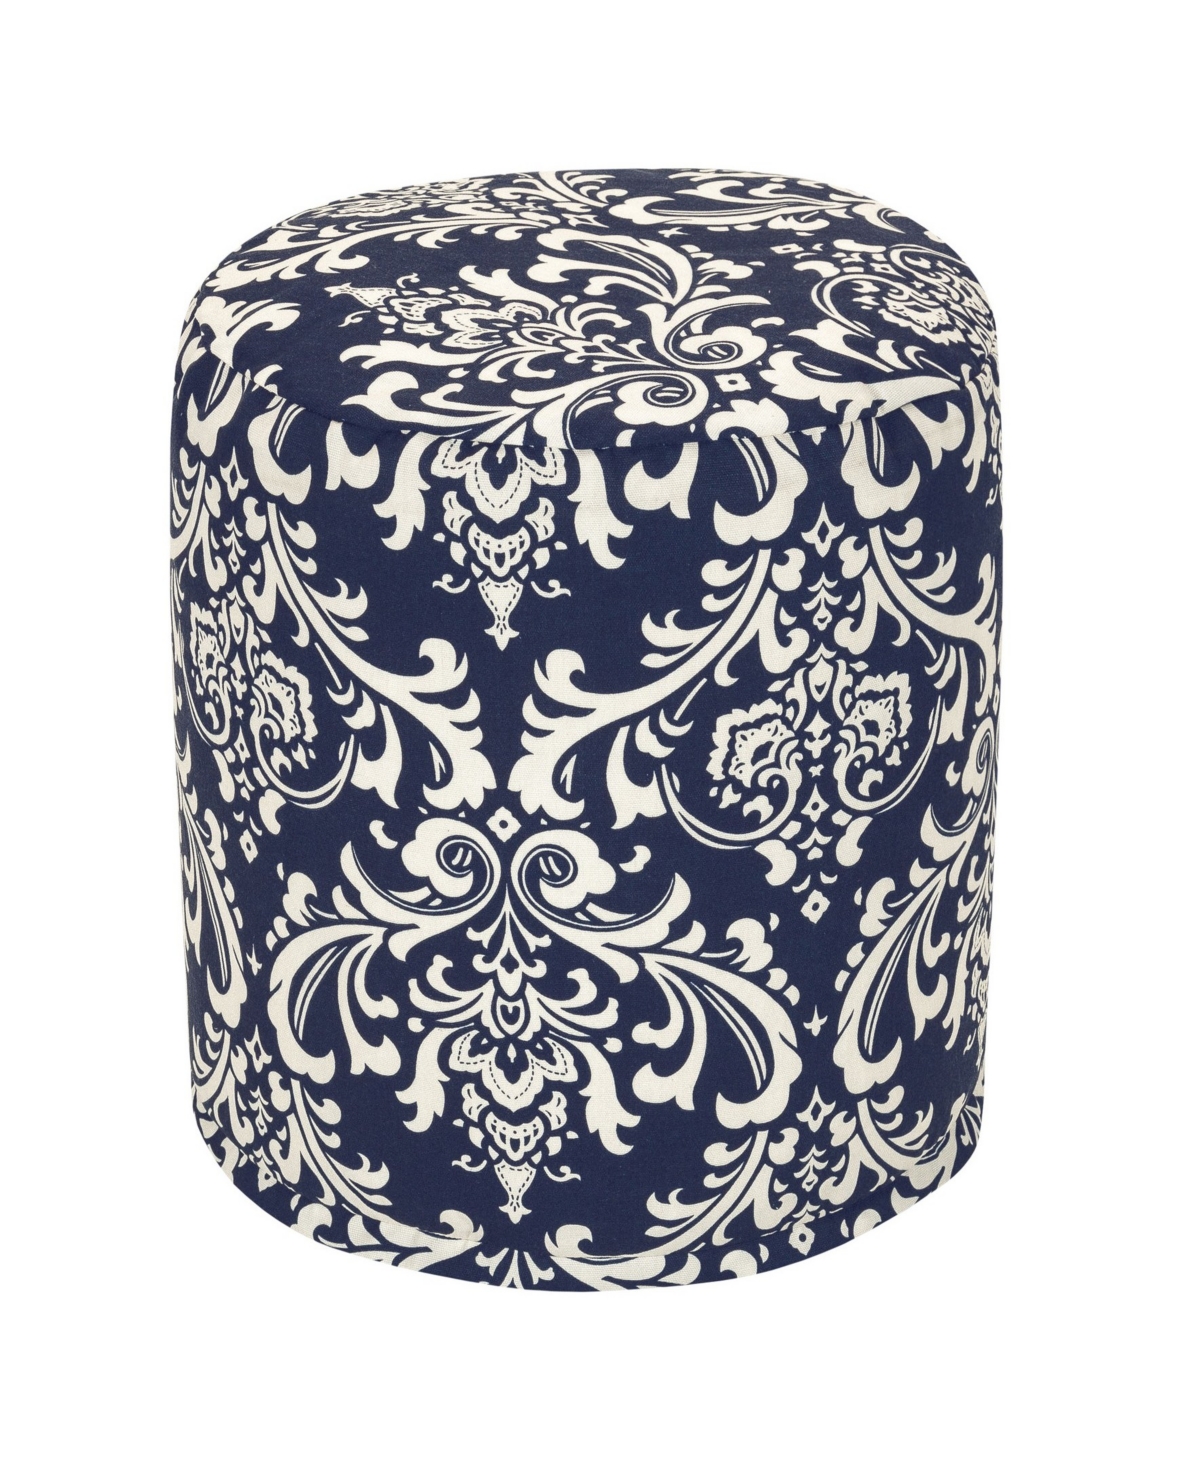 UPC 859072204126 product image for Majestic Home Goods French Quarter Ottoman Round Pouf with Removable Cover 16